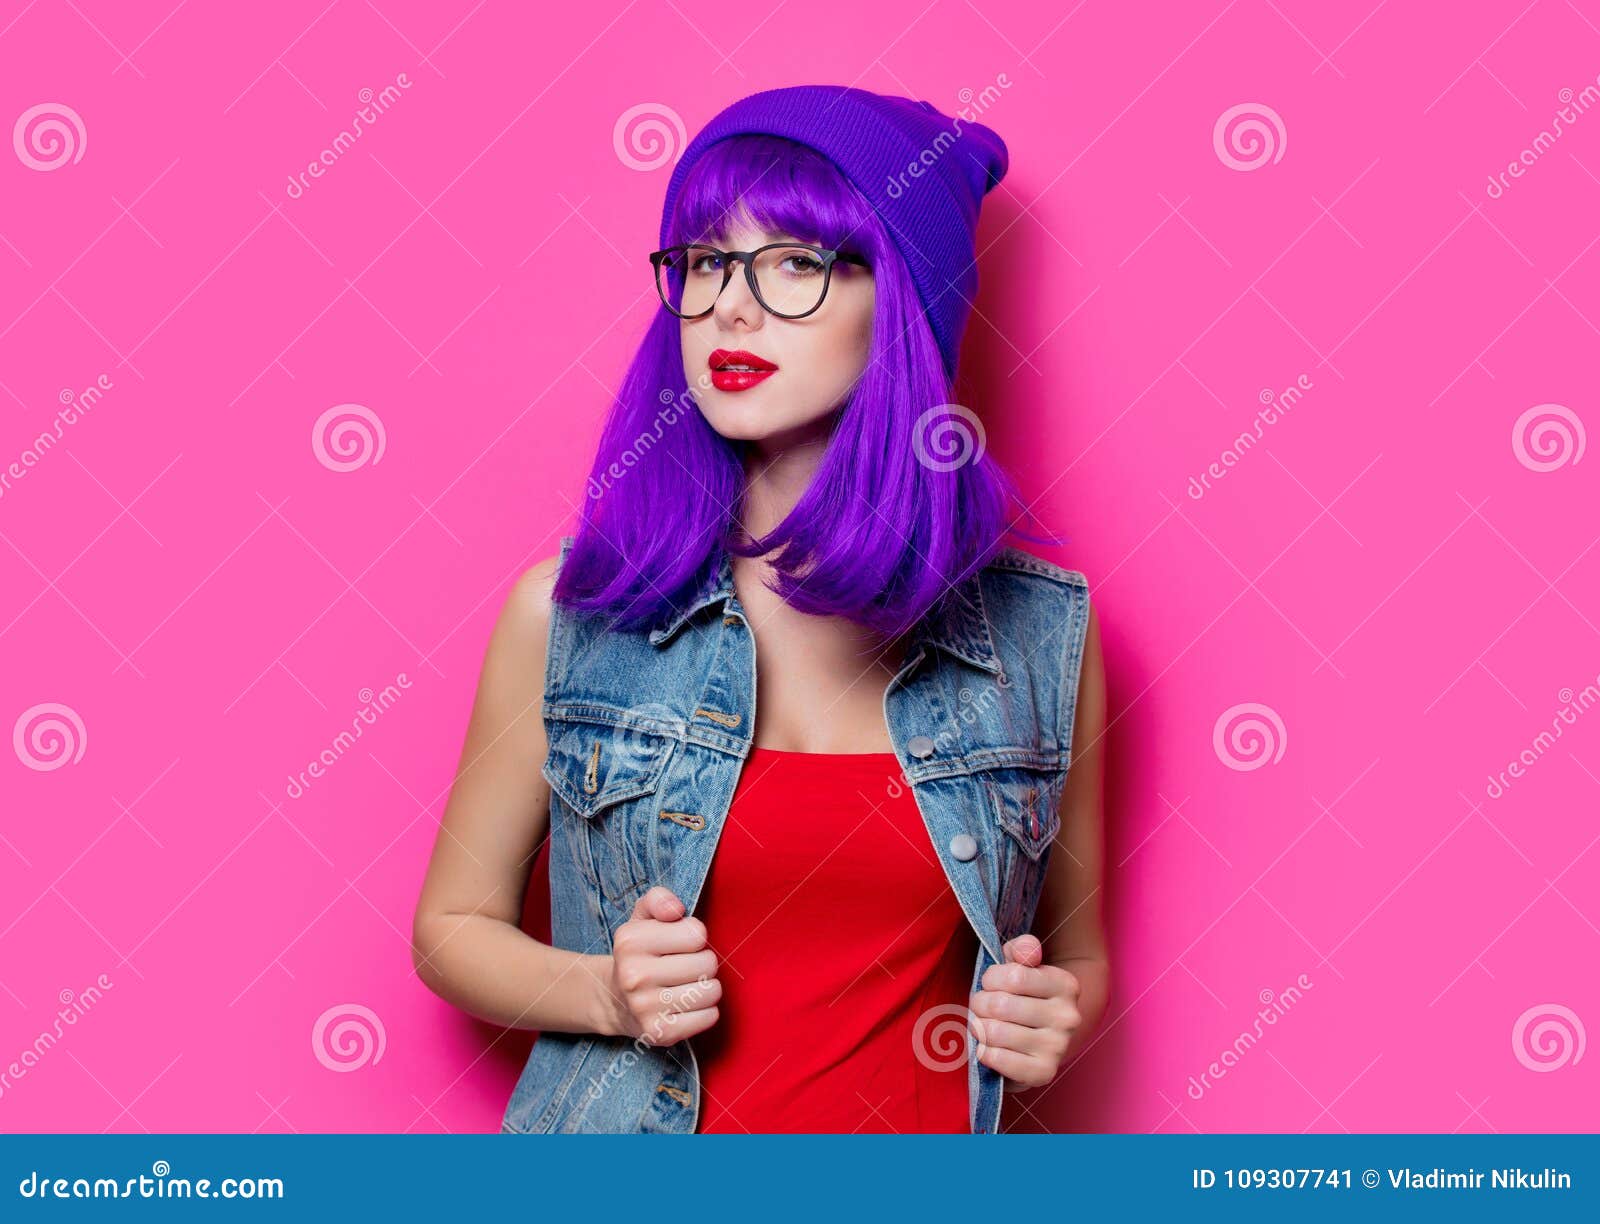 Hipster Girl with Purple Hair Stock Image - Image of hair, purple ...